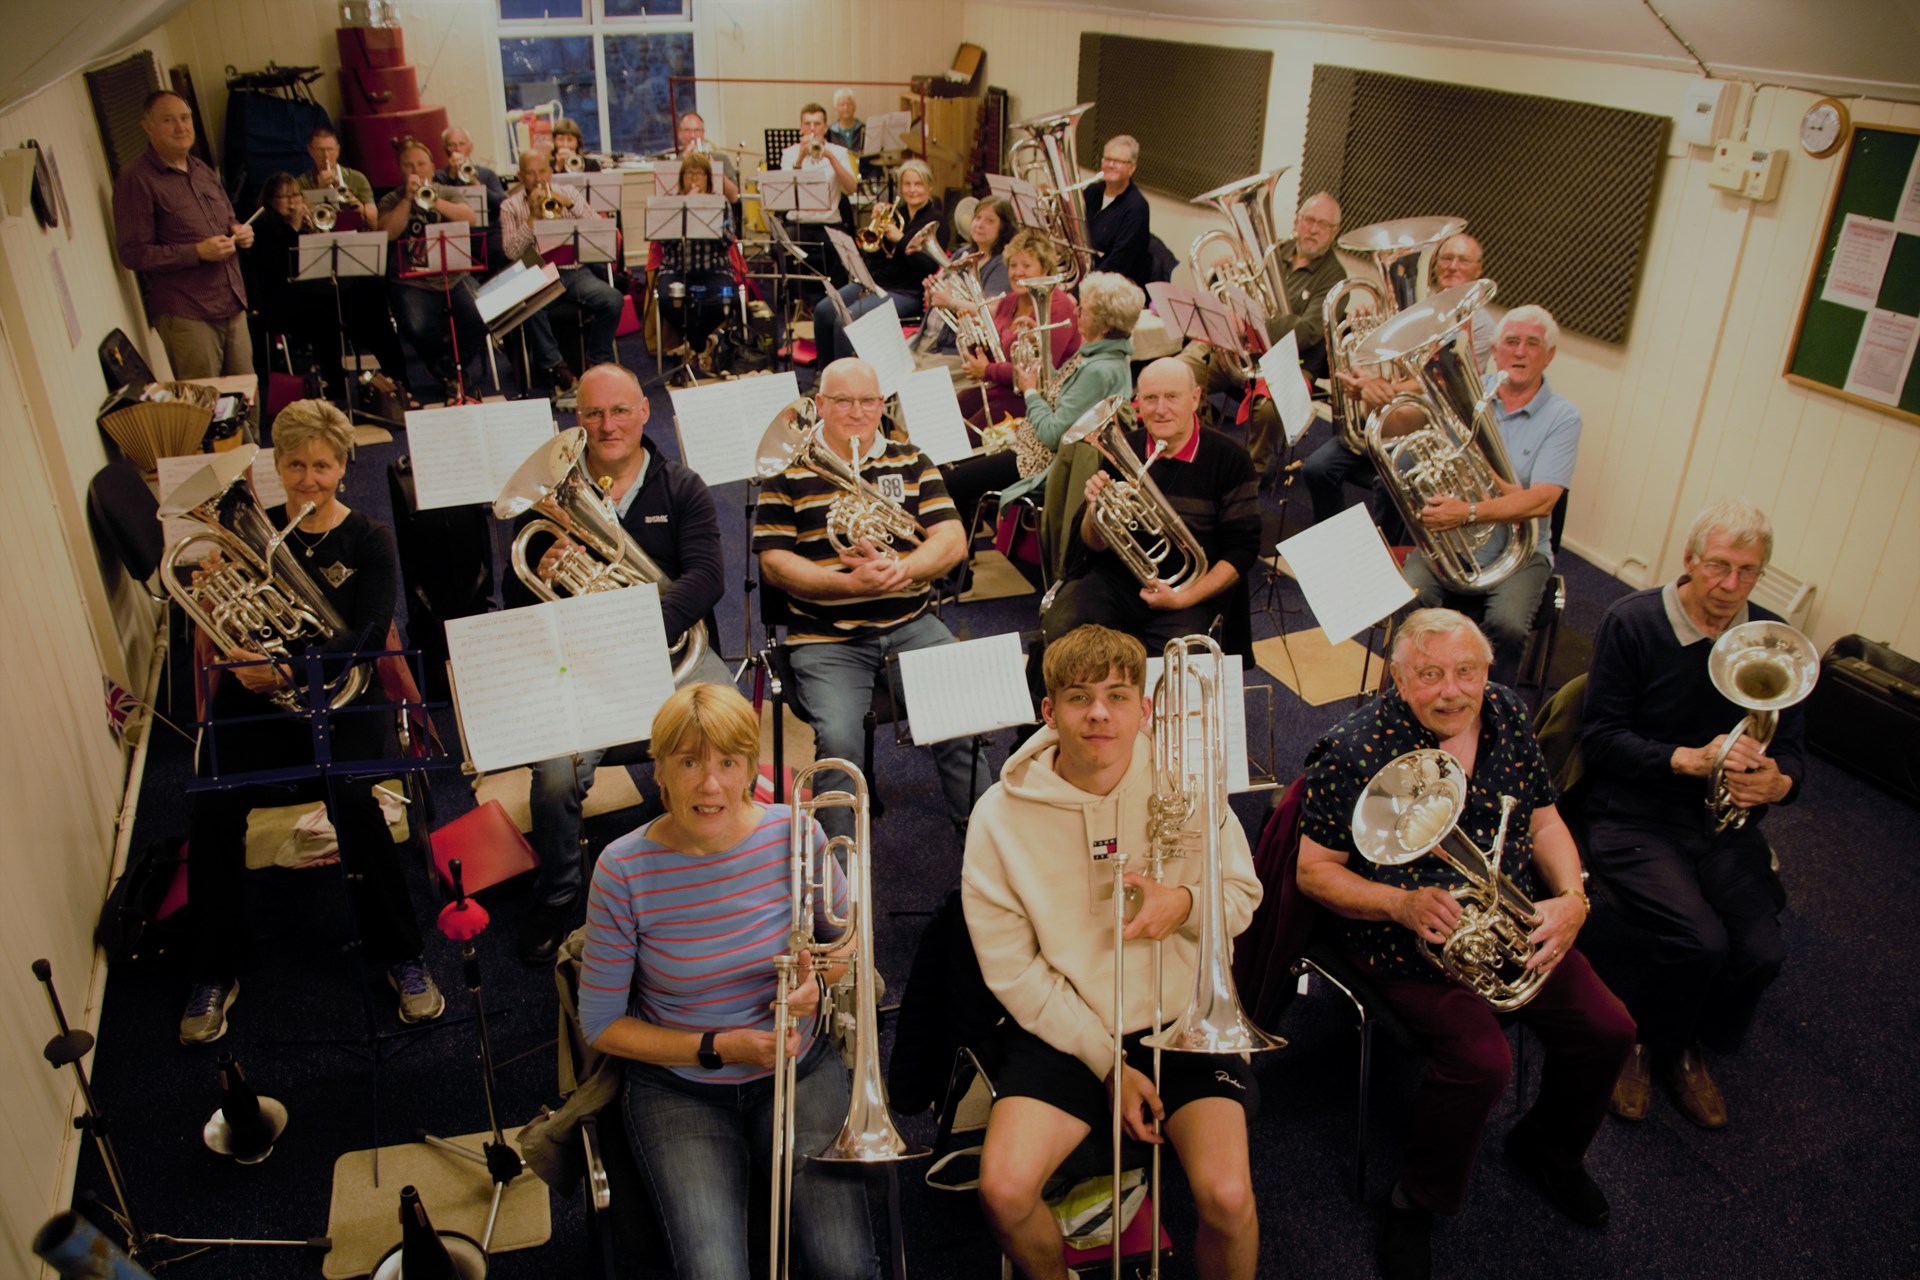 We will soon need a larger Bandroom (30+)